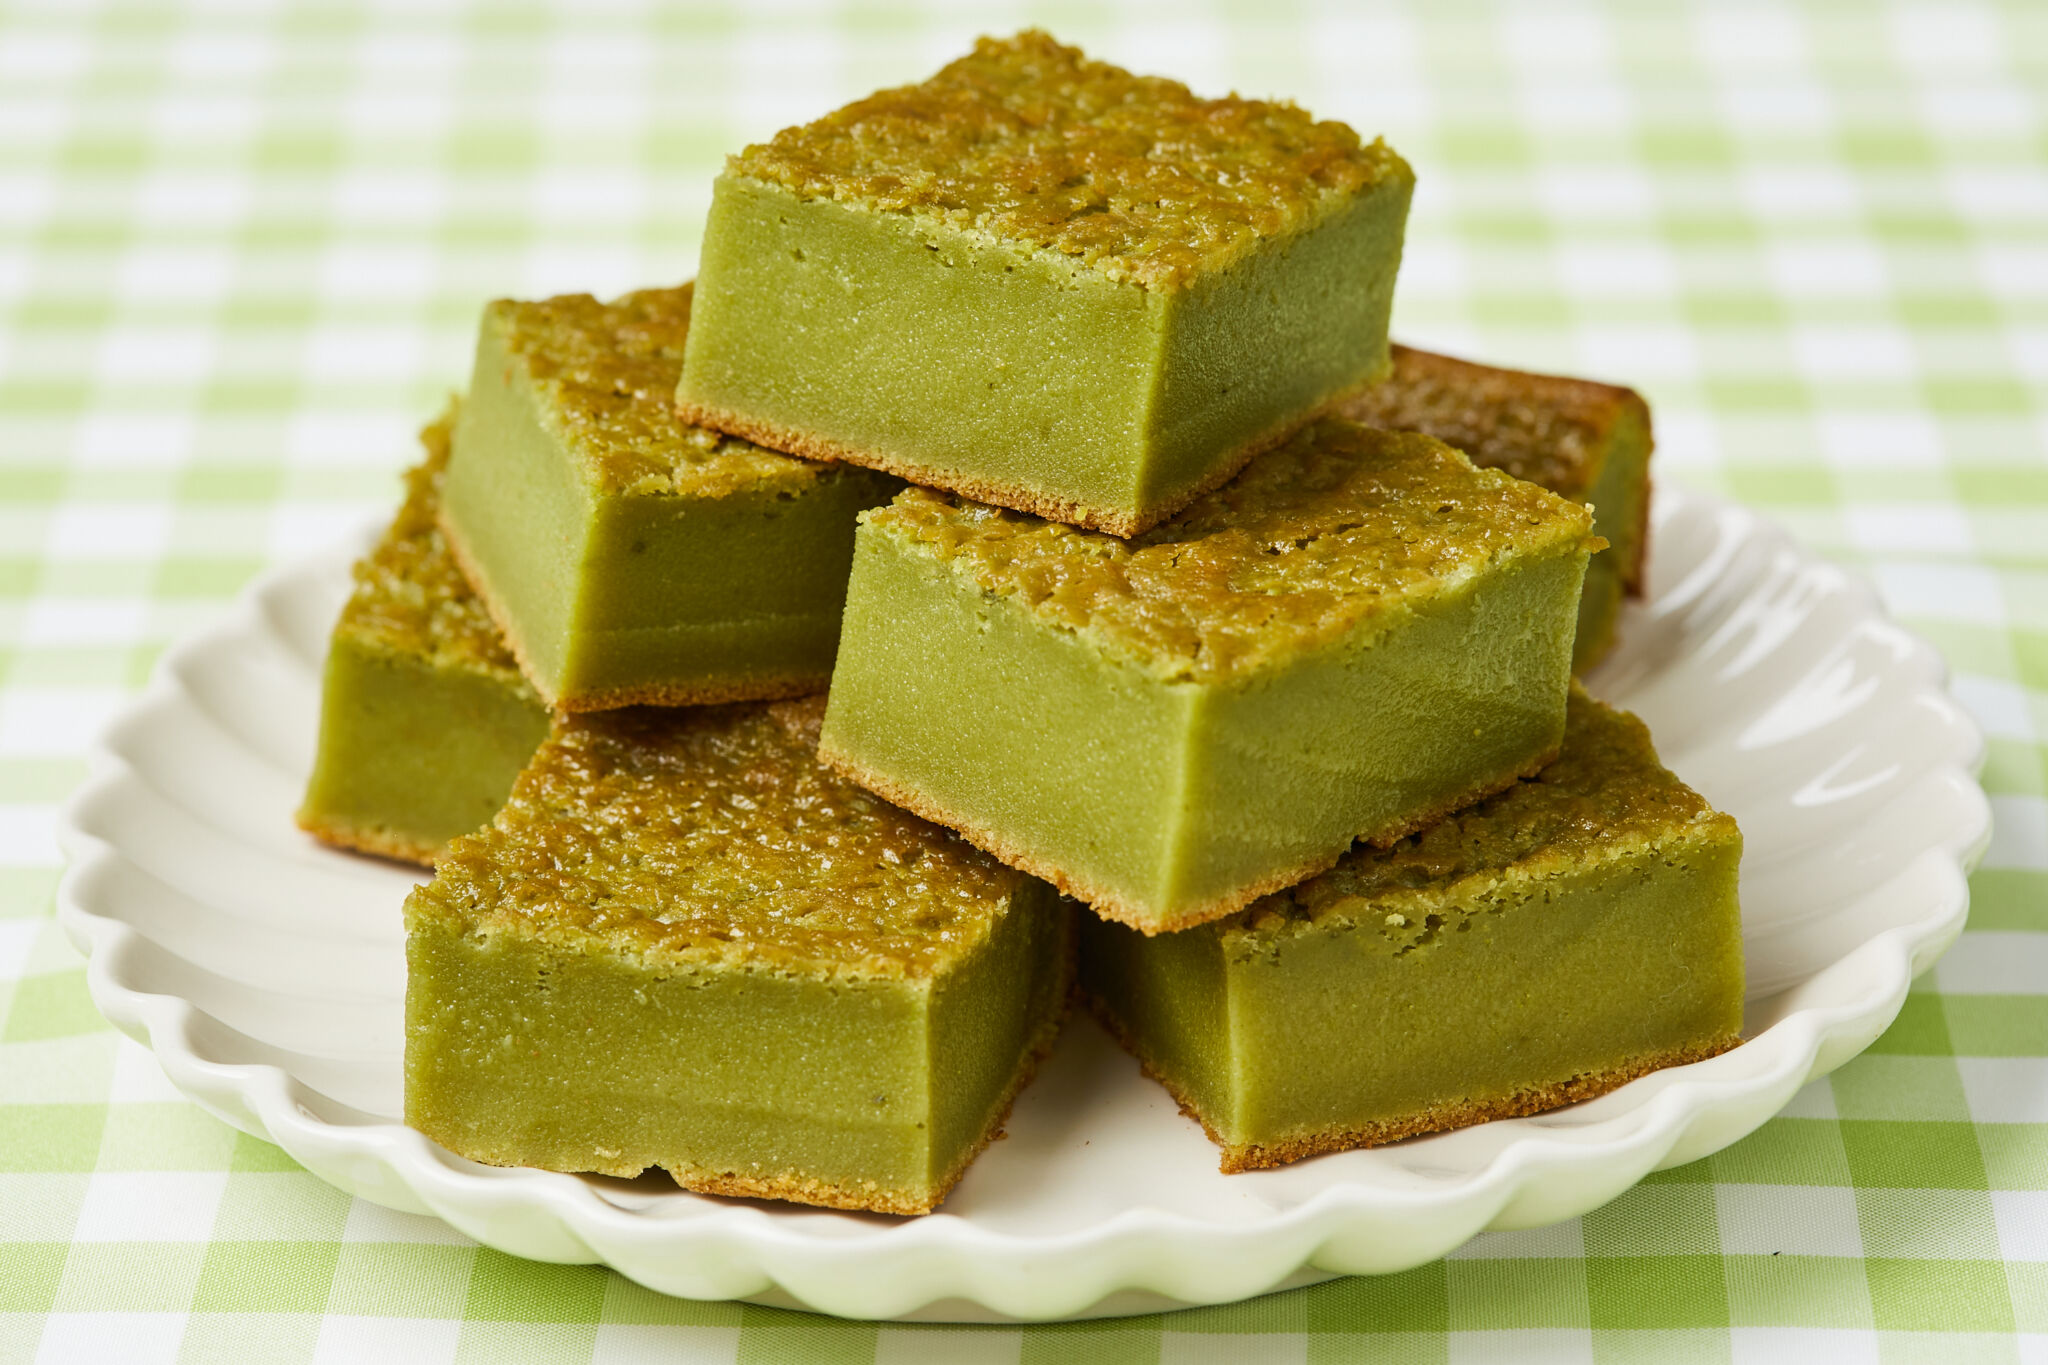 6 squares of rich Matcha Butter Mochi are placed on a white scalloped-edge plate. The green tea sweet rice cake has golden crispy crust on top and at the bottom, with green smooth chewy and soft center.